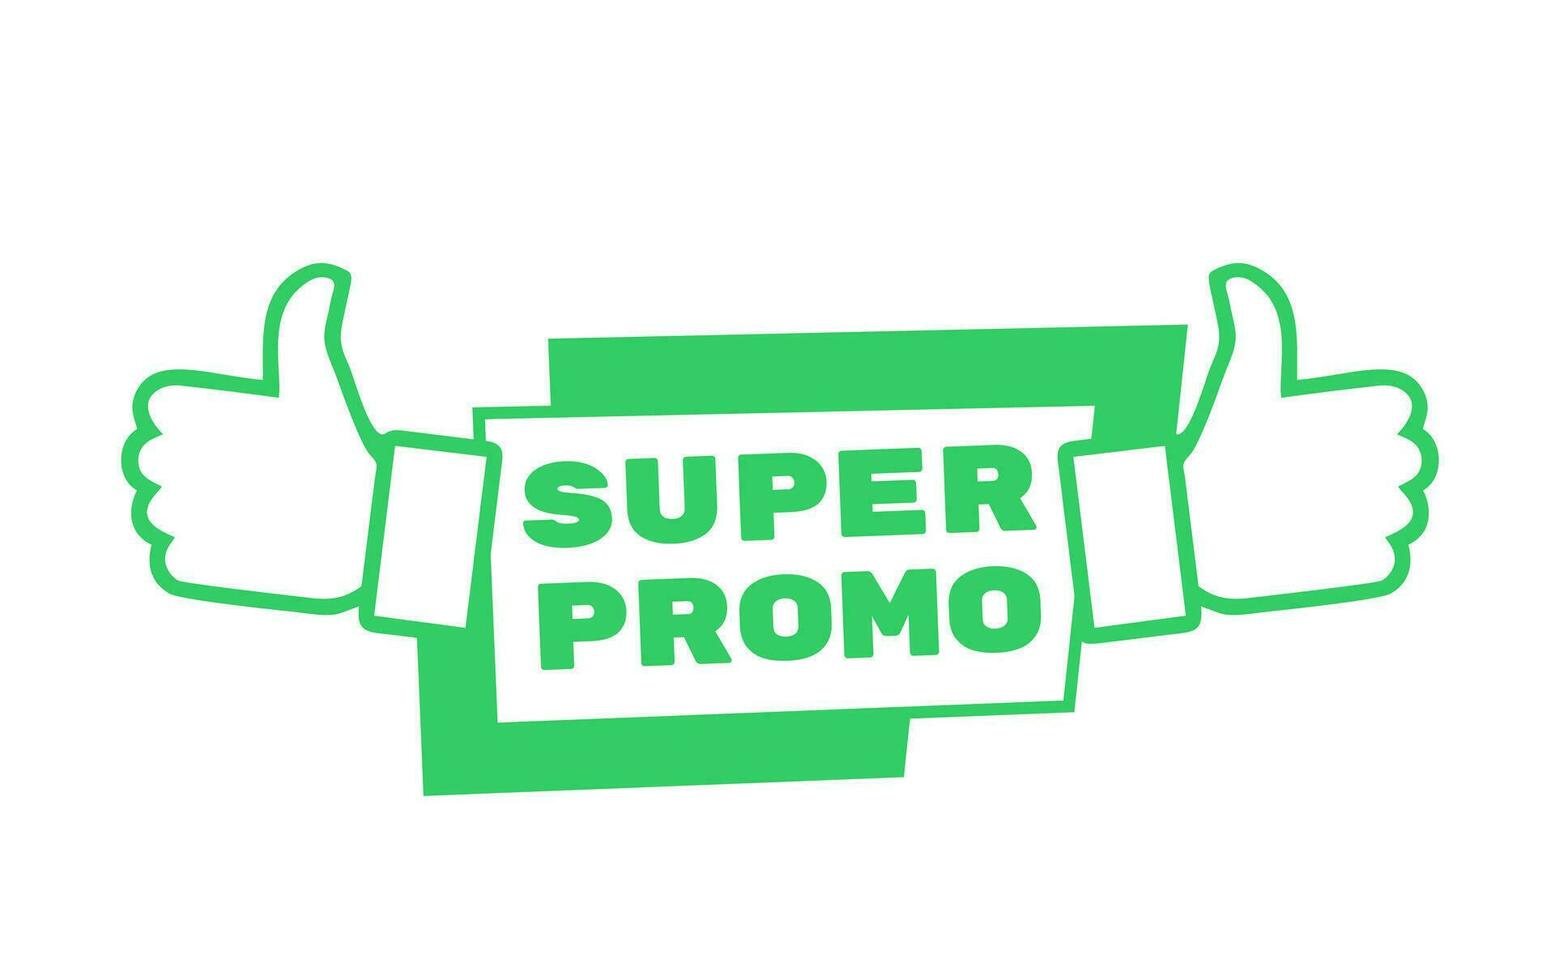 Super Promo Thumb Tag Banner Illustration. Green Vector Element for shop retail